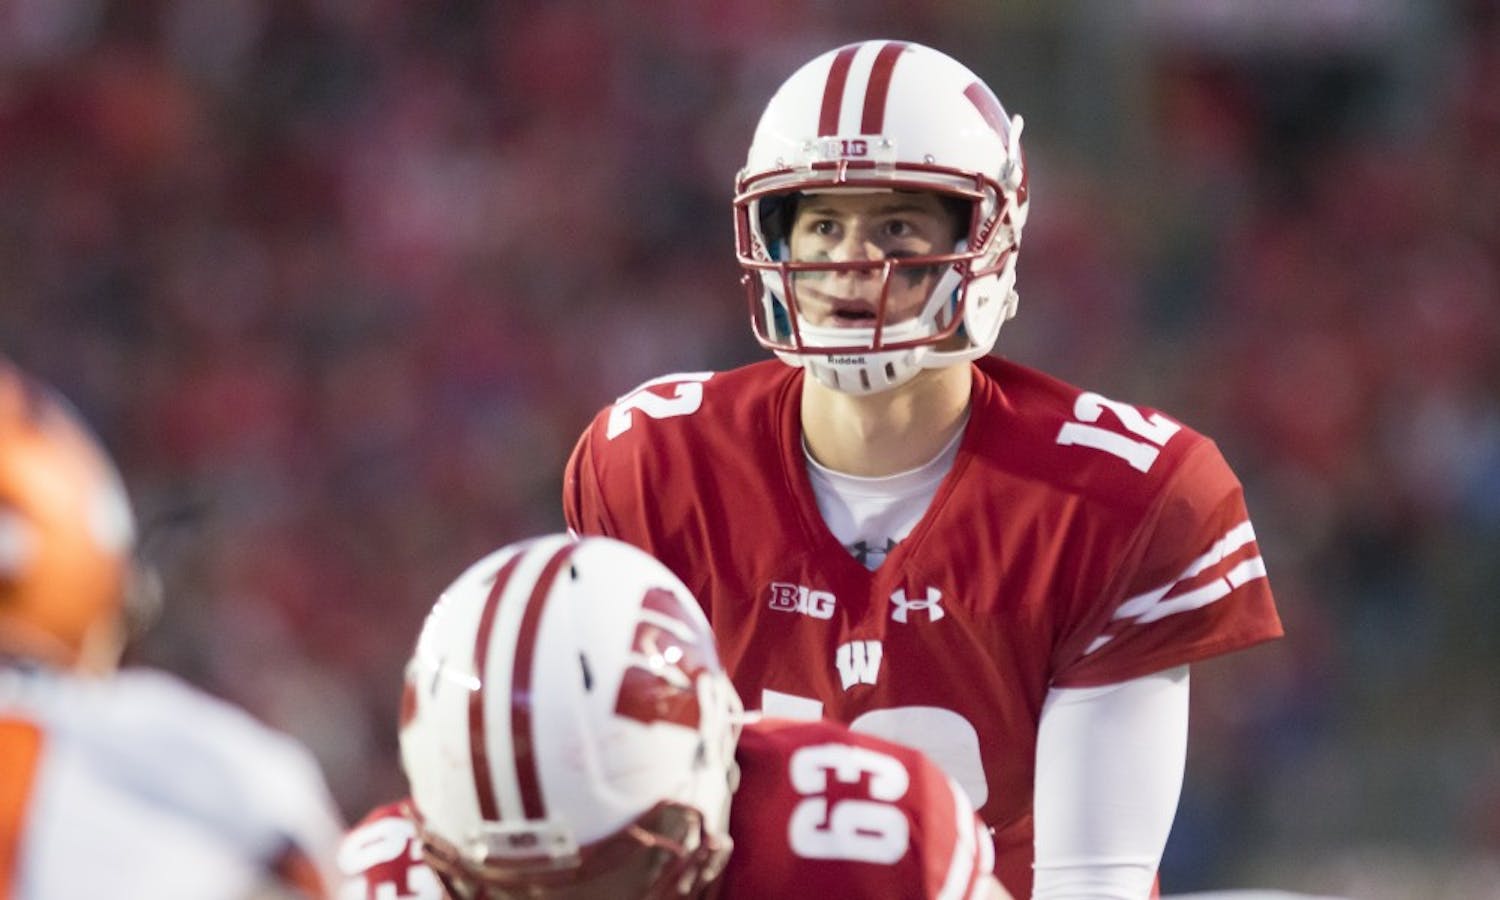 With senior Alex Hornibrook on his way out of the program, sophomore Jack Coan and freshman Graham Mertz are set to compete for Wisconsin's starting job.